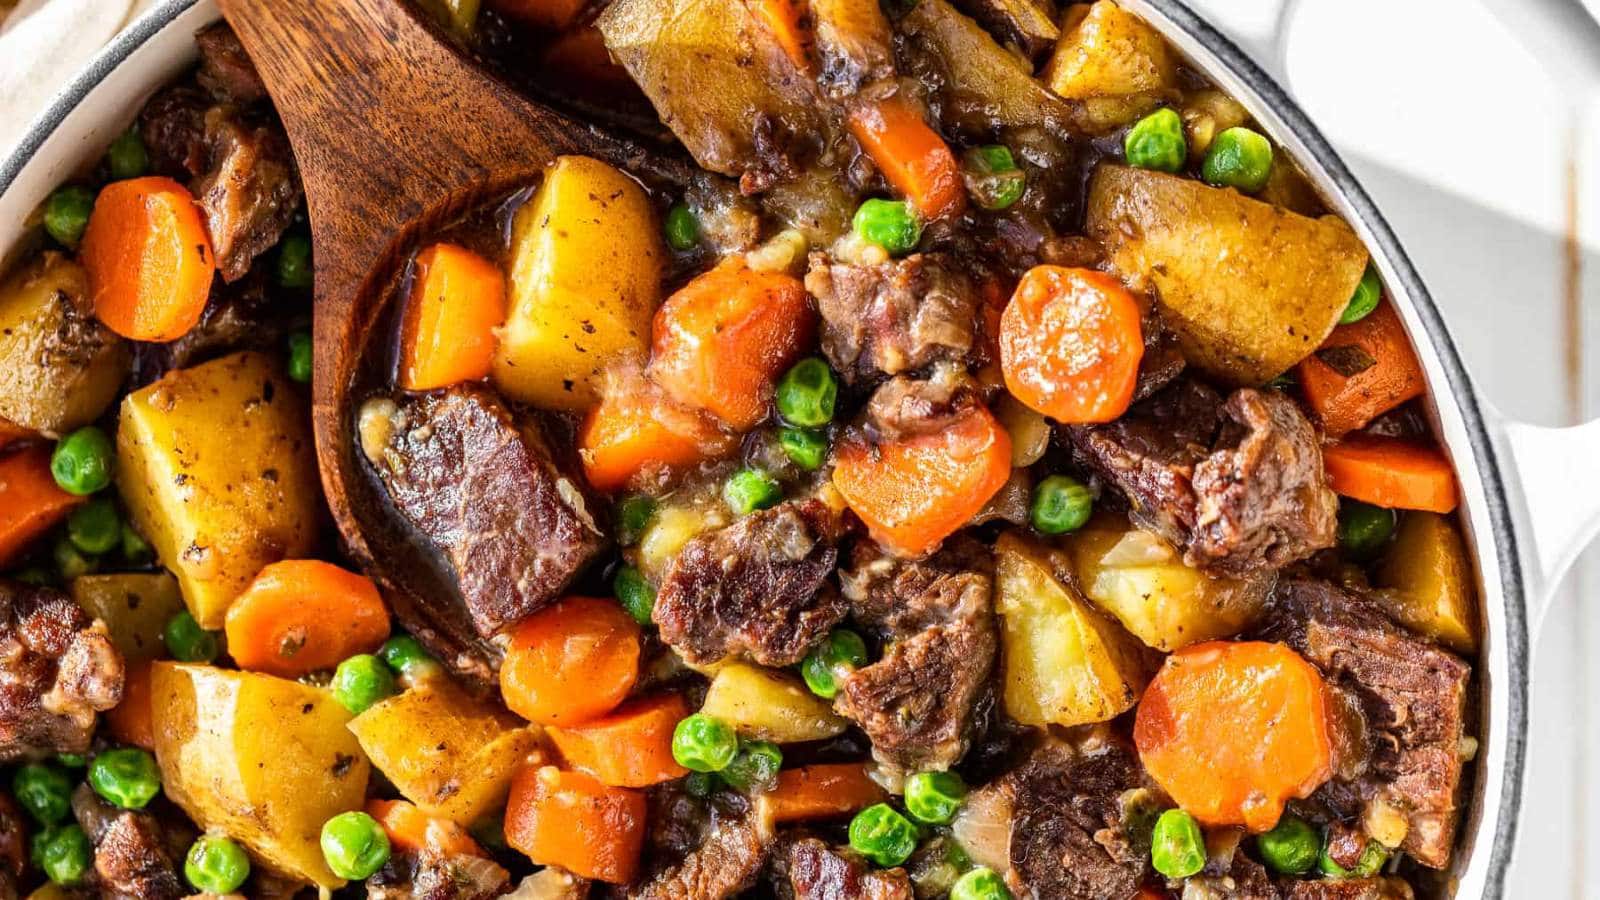 Dutch Oven Beef Stew reci[e by Get Inspired Every Day.